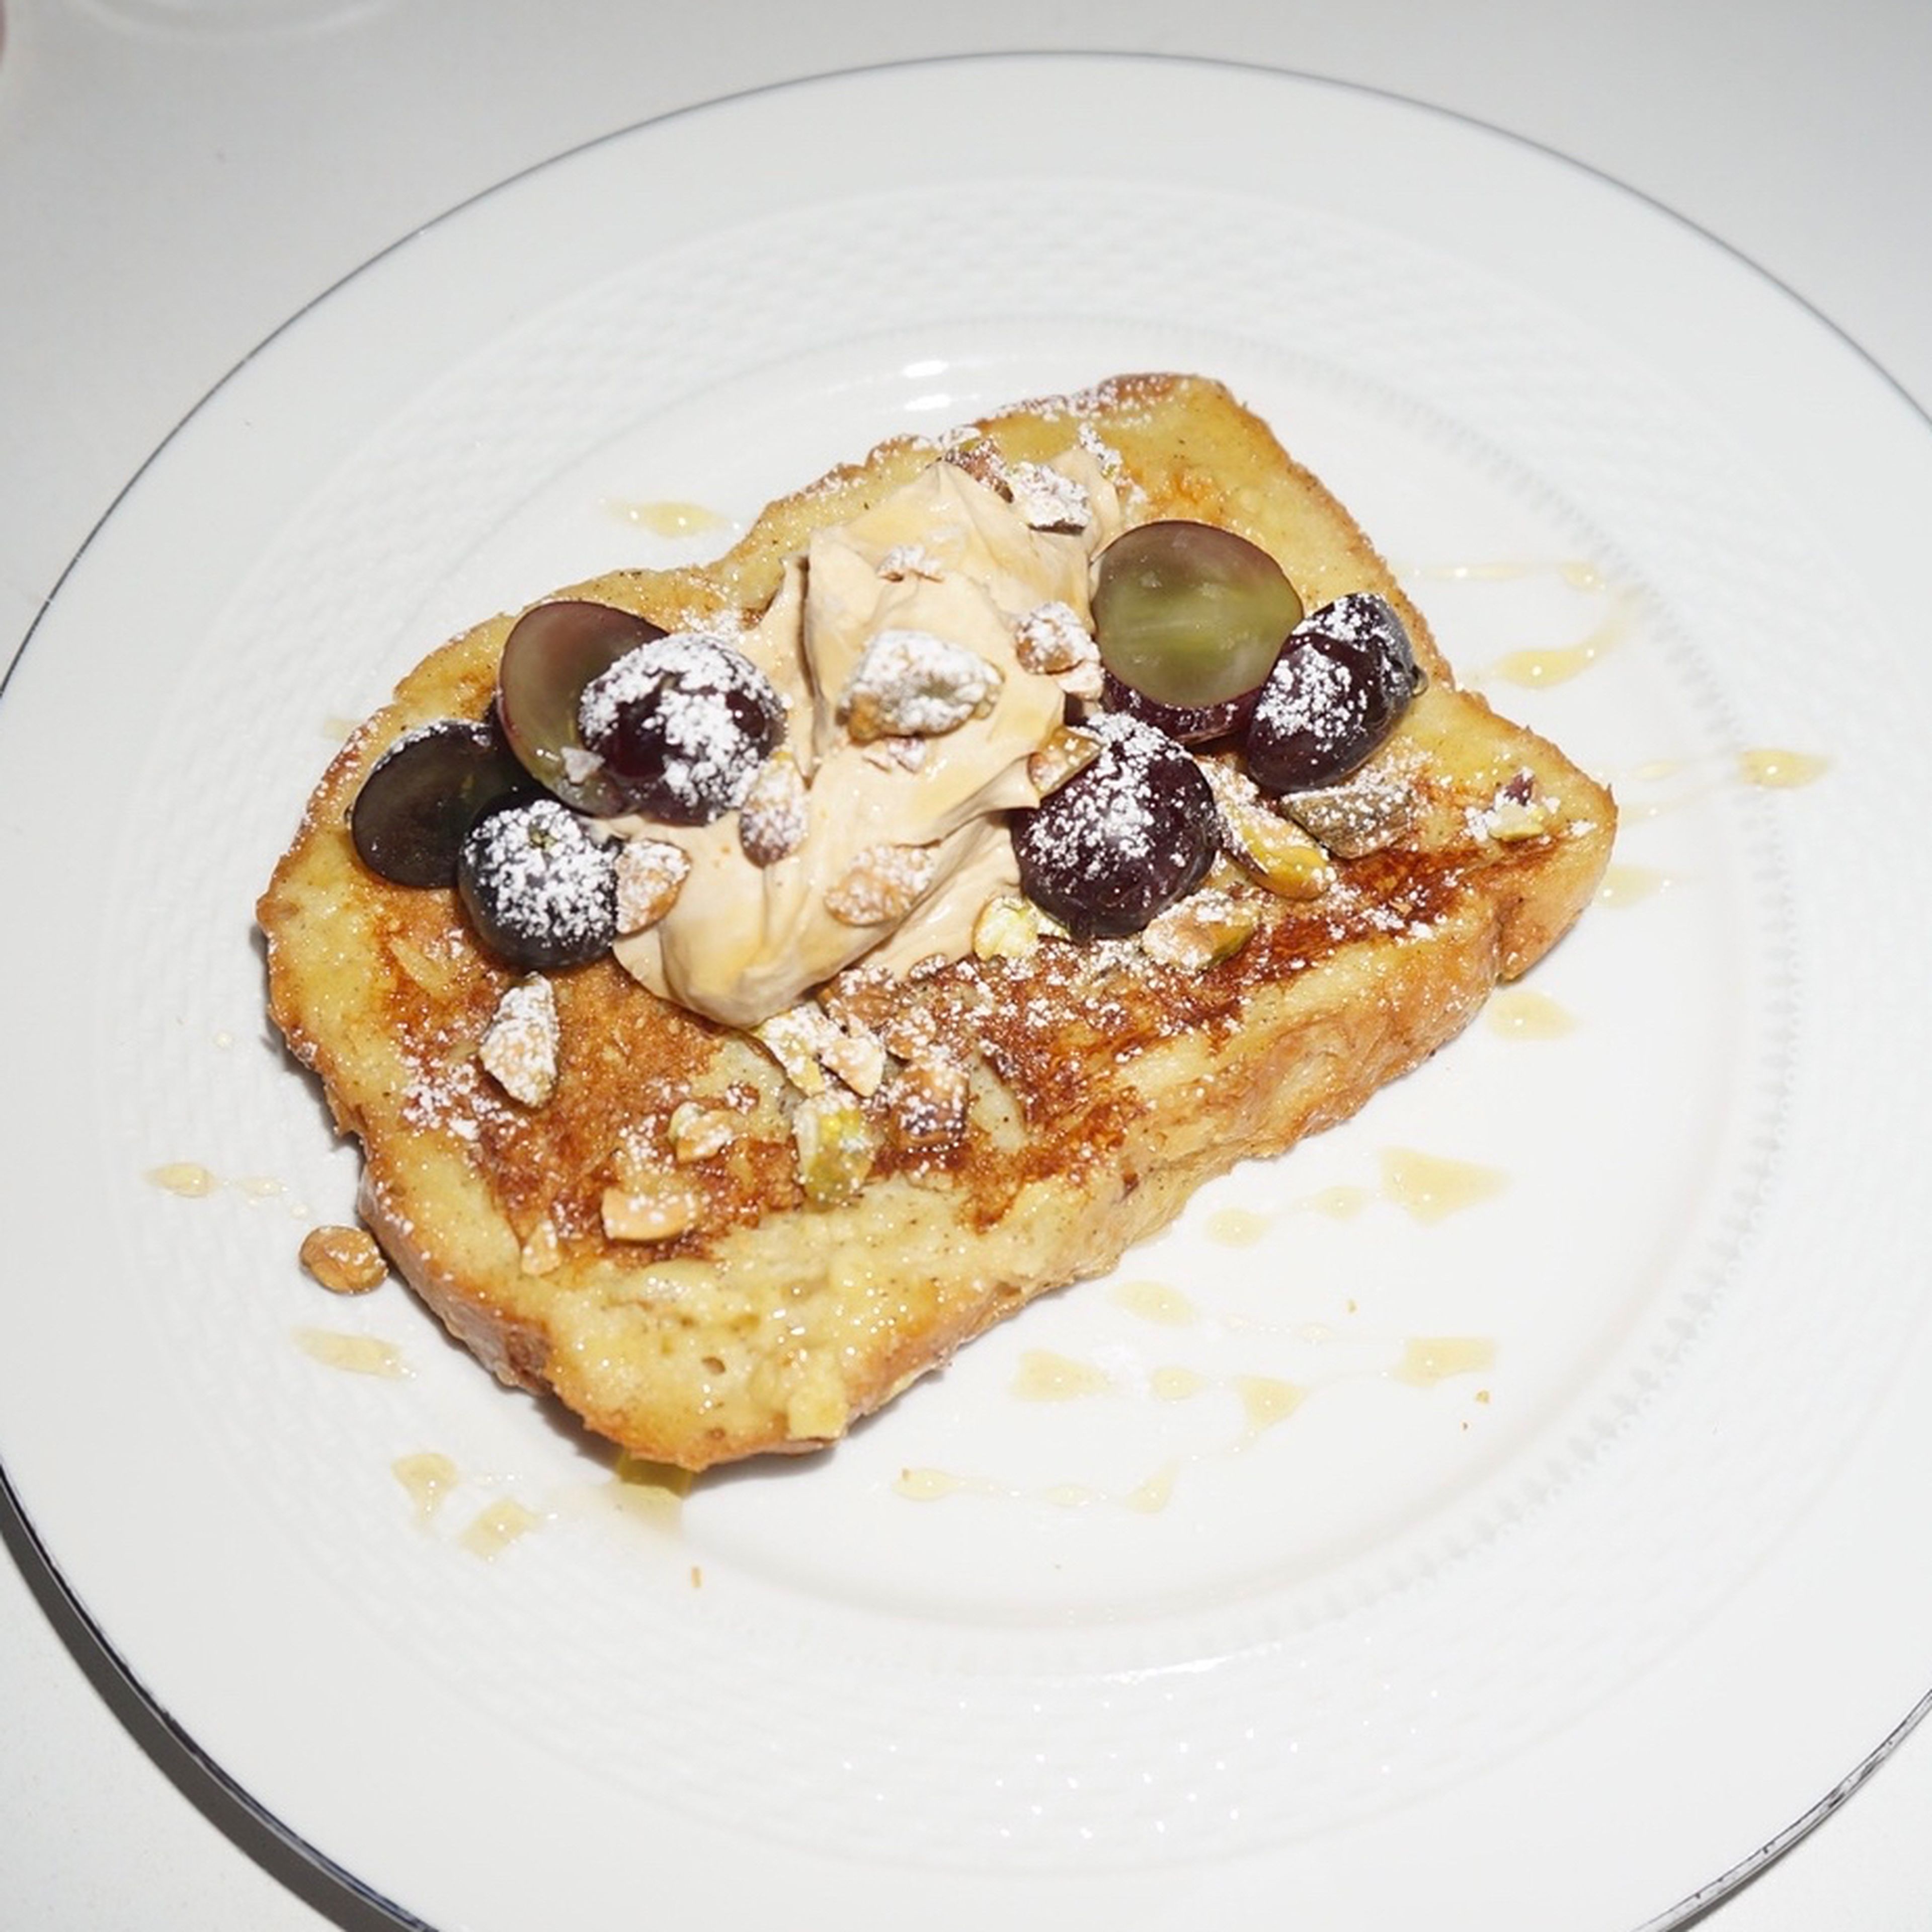 Stockholm French toast